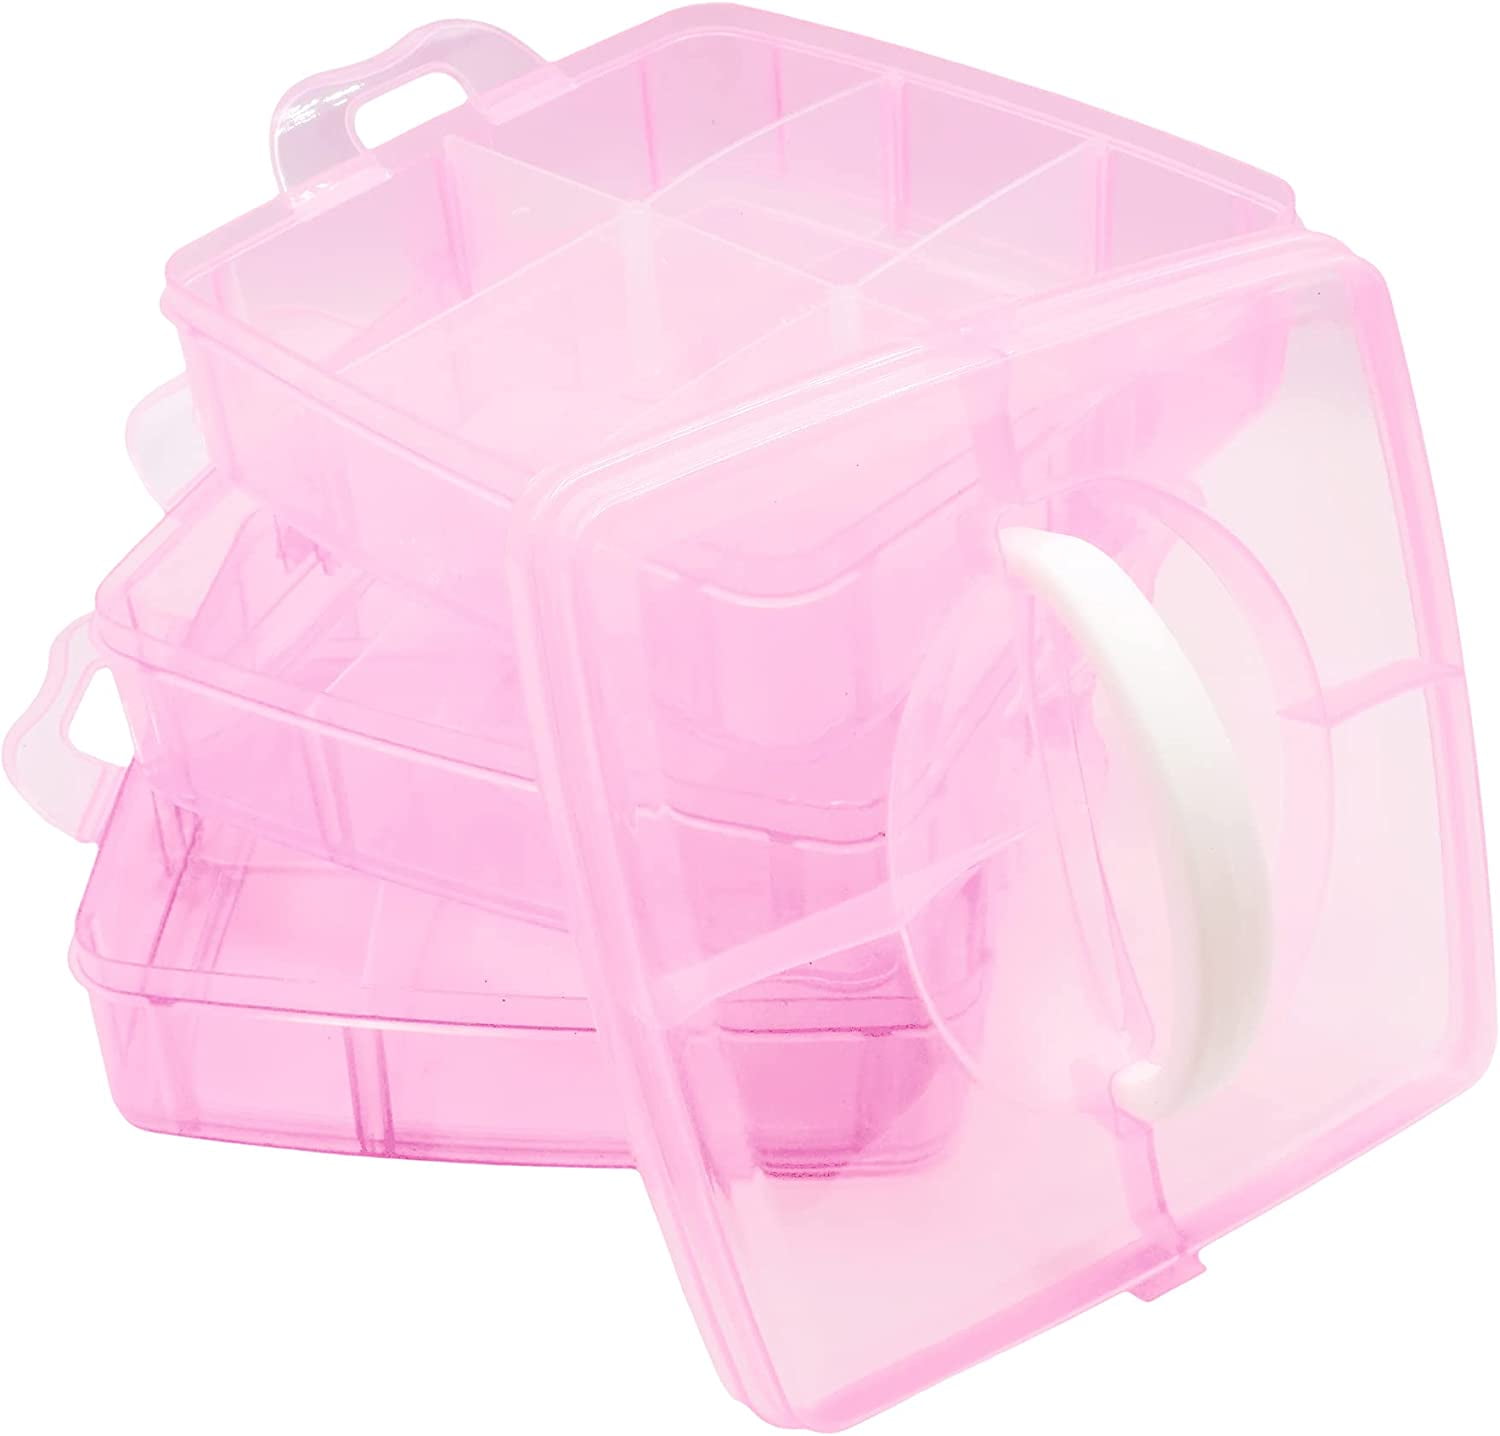 Tian Chen Airtight Food Storage Containers, Stackable Cookie Carriers with Handle Lid, Waterproof Leakproof Bacon Tray, 3 Layer Medium BPA Free(Pink)